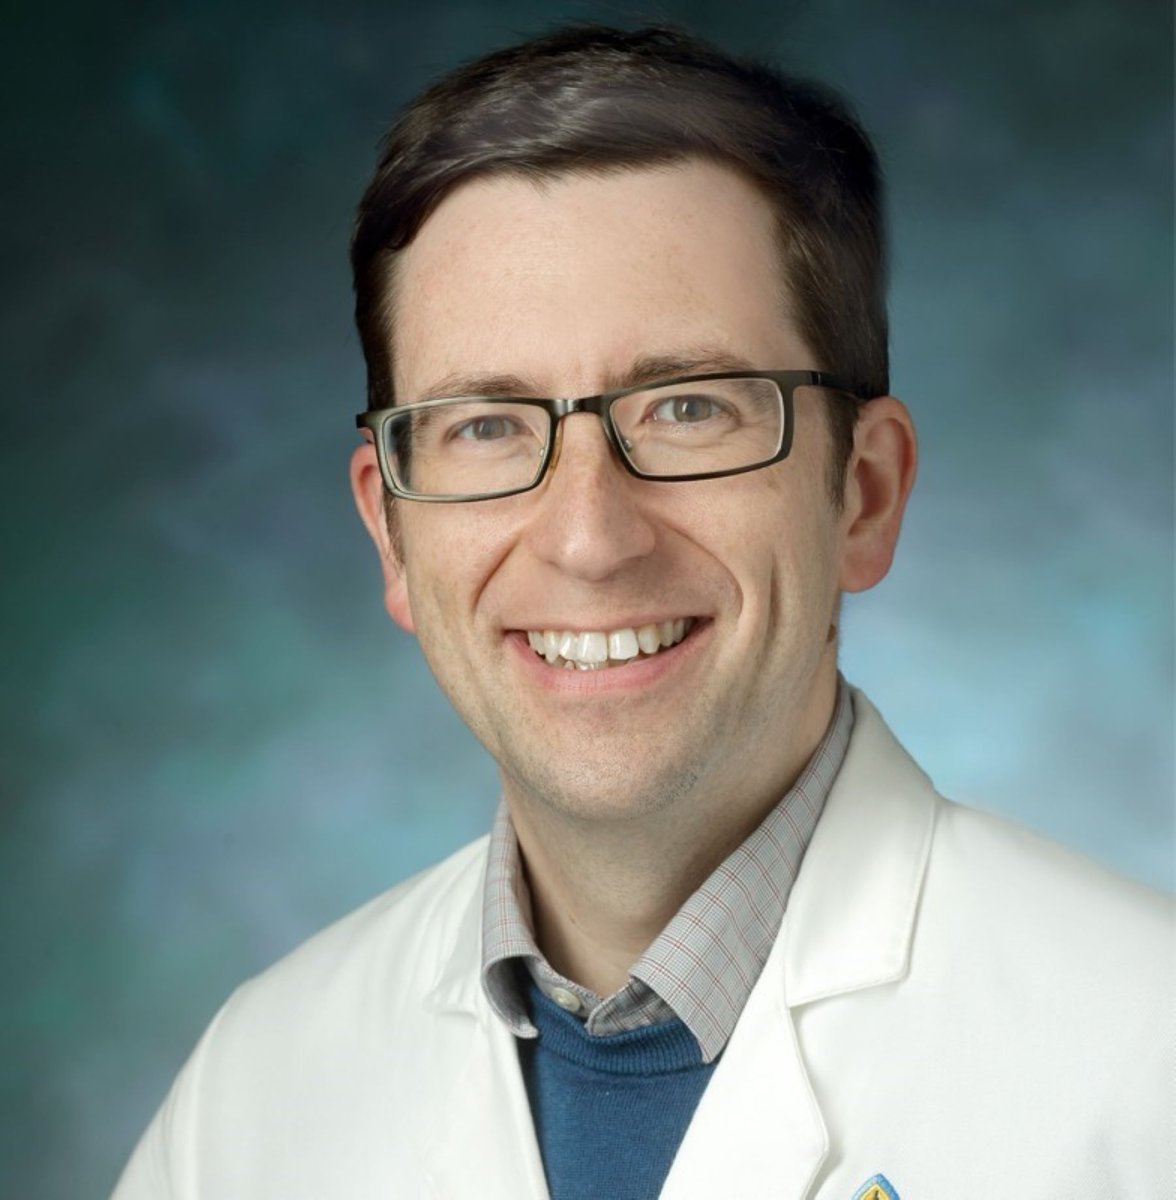 Kudos to Dr. Laurence Carroll, who recently presented at the 266th American Chemical Society Meeting in New Orleans, speaking on “Investigating the Mechanism of Aluminum Fluoride Chelation”. The work has also been accepted for journal publication.